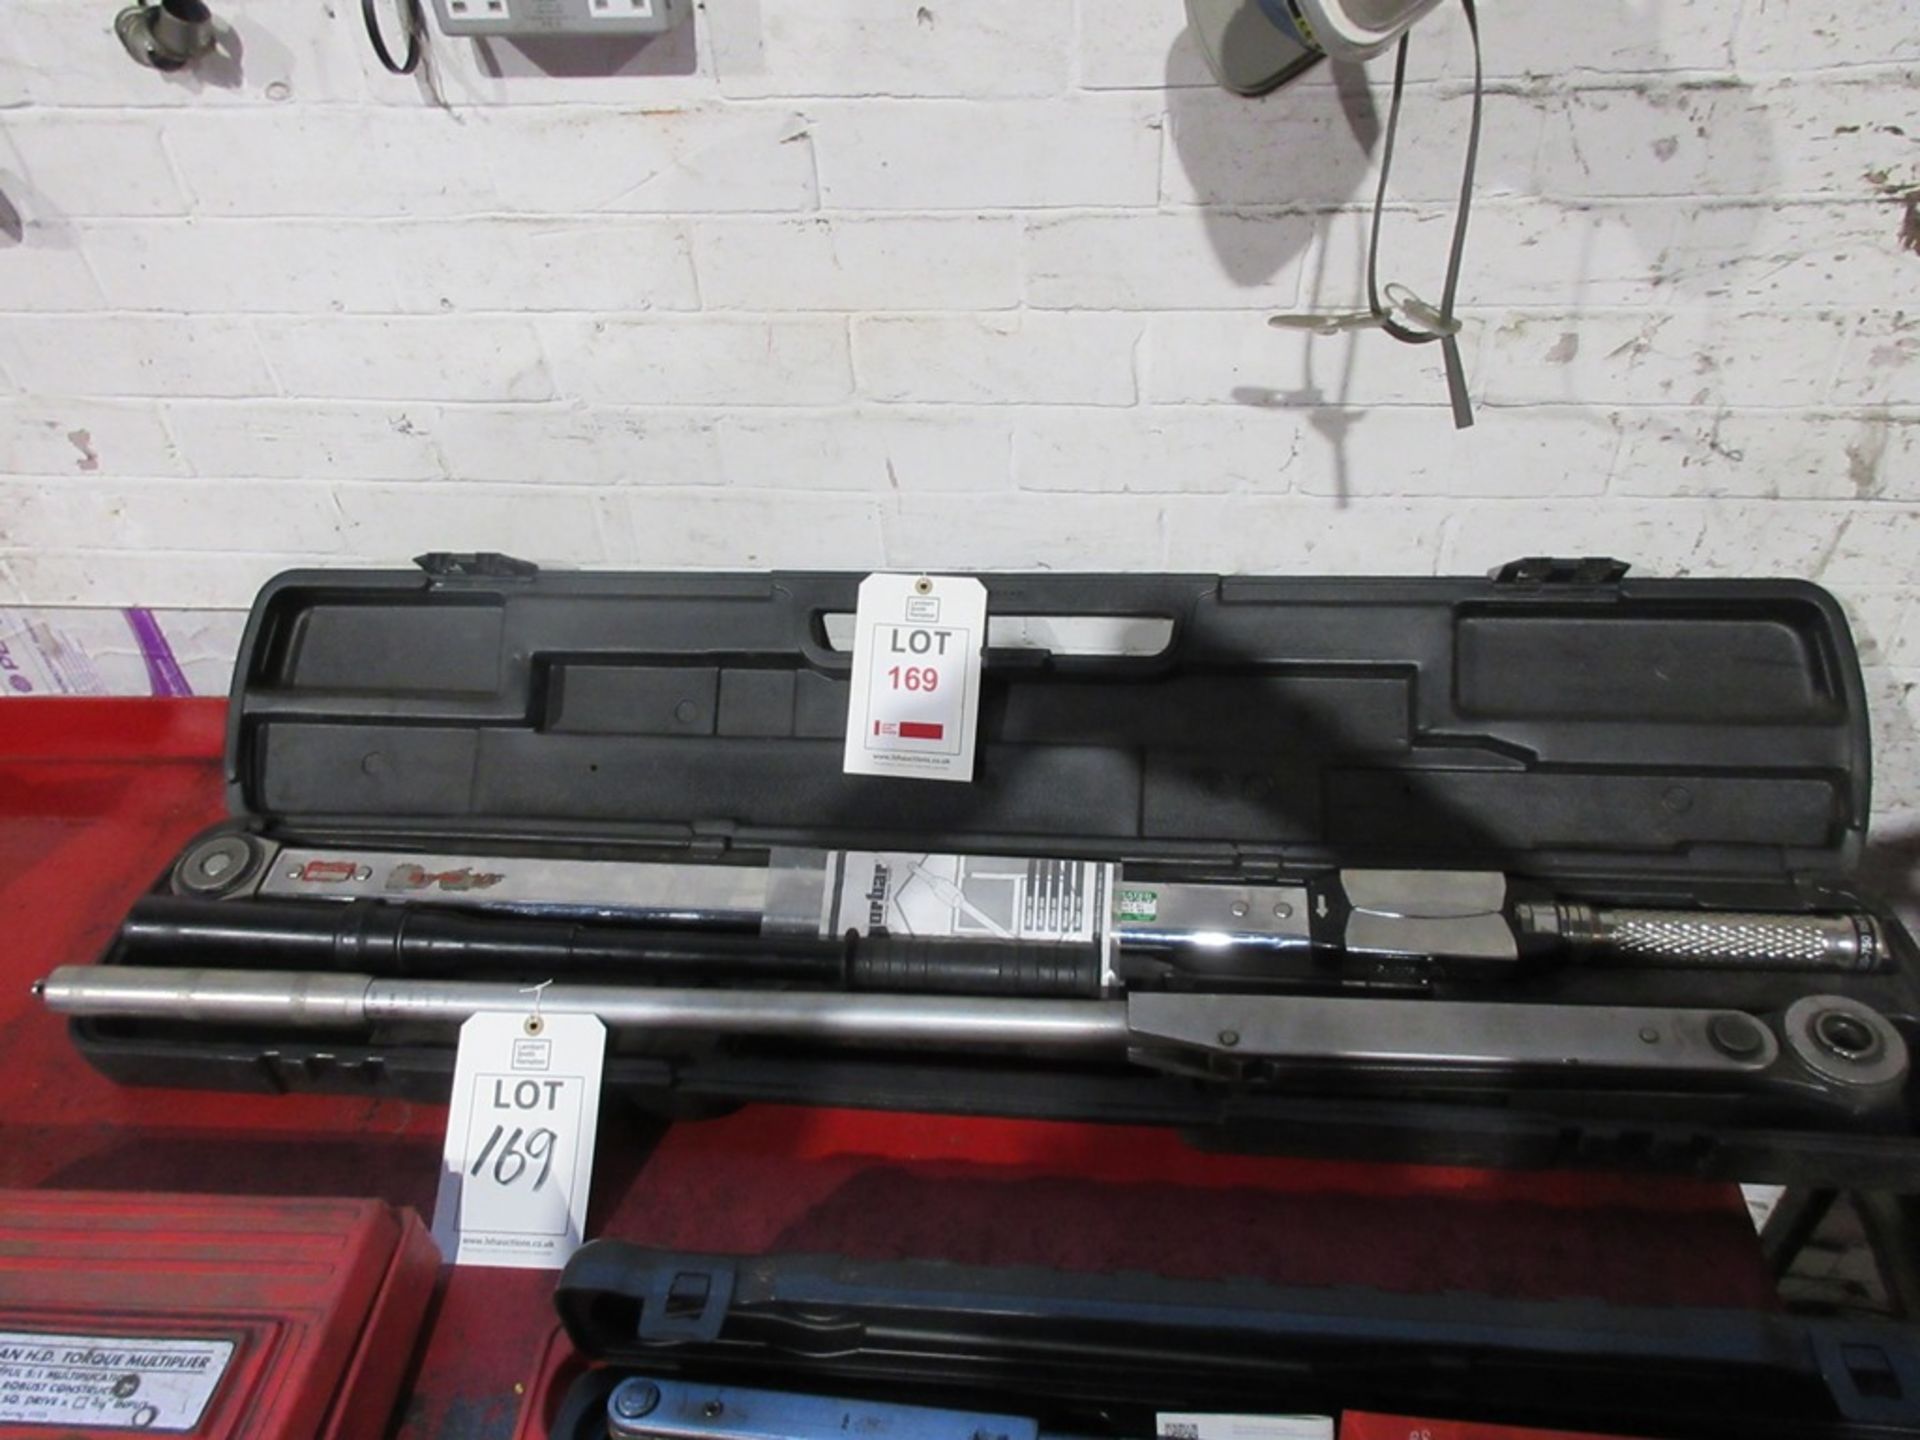 Norbar Professional torque wrench, model 1000 with case & Britool torque wrench, model HVTR 7200 - Image 2 of 3